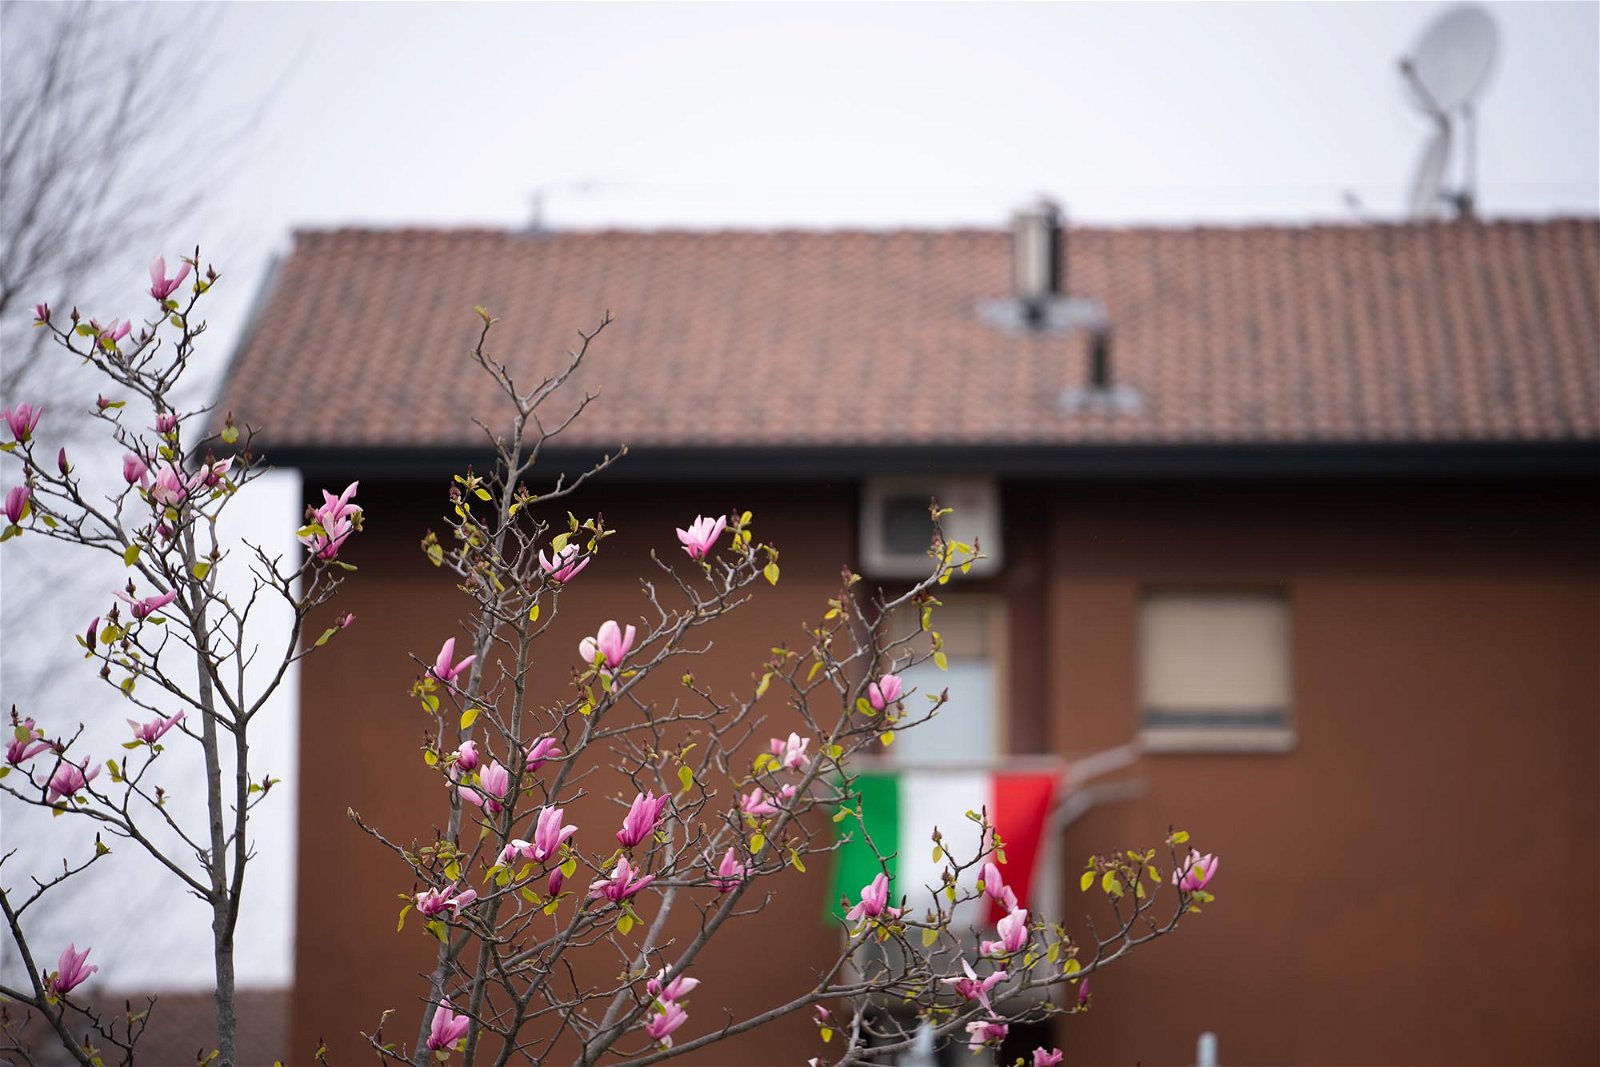 Spring blossoms invoke a sense of hope near the SP field hospital for COVID-19 patients in Cremona, Italy..